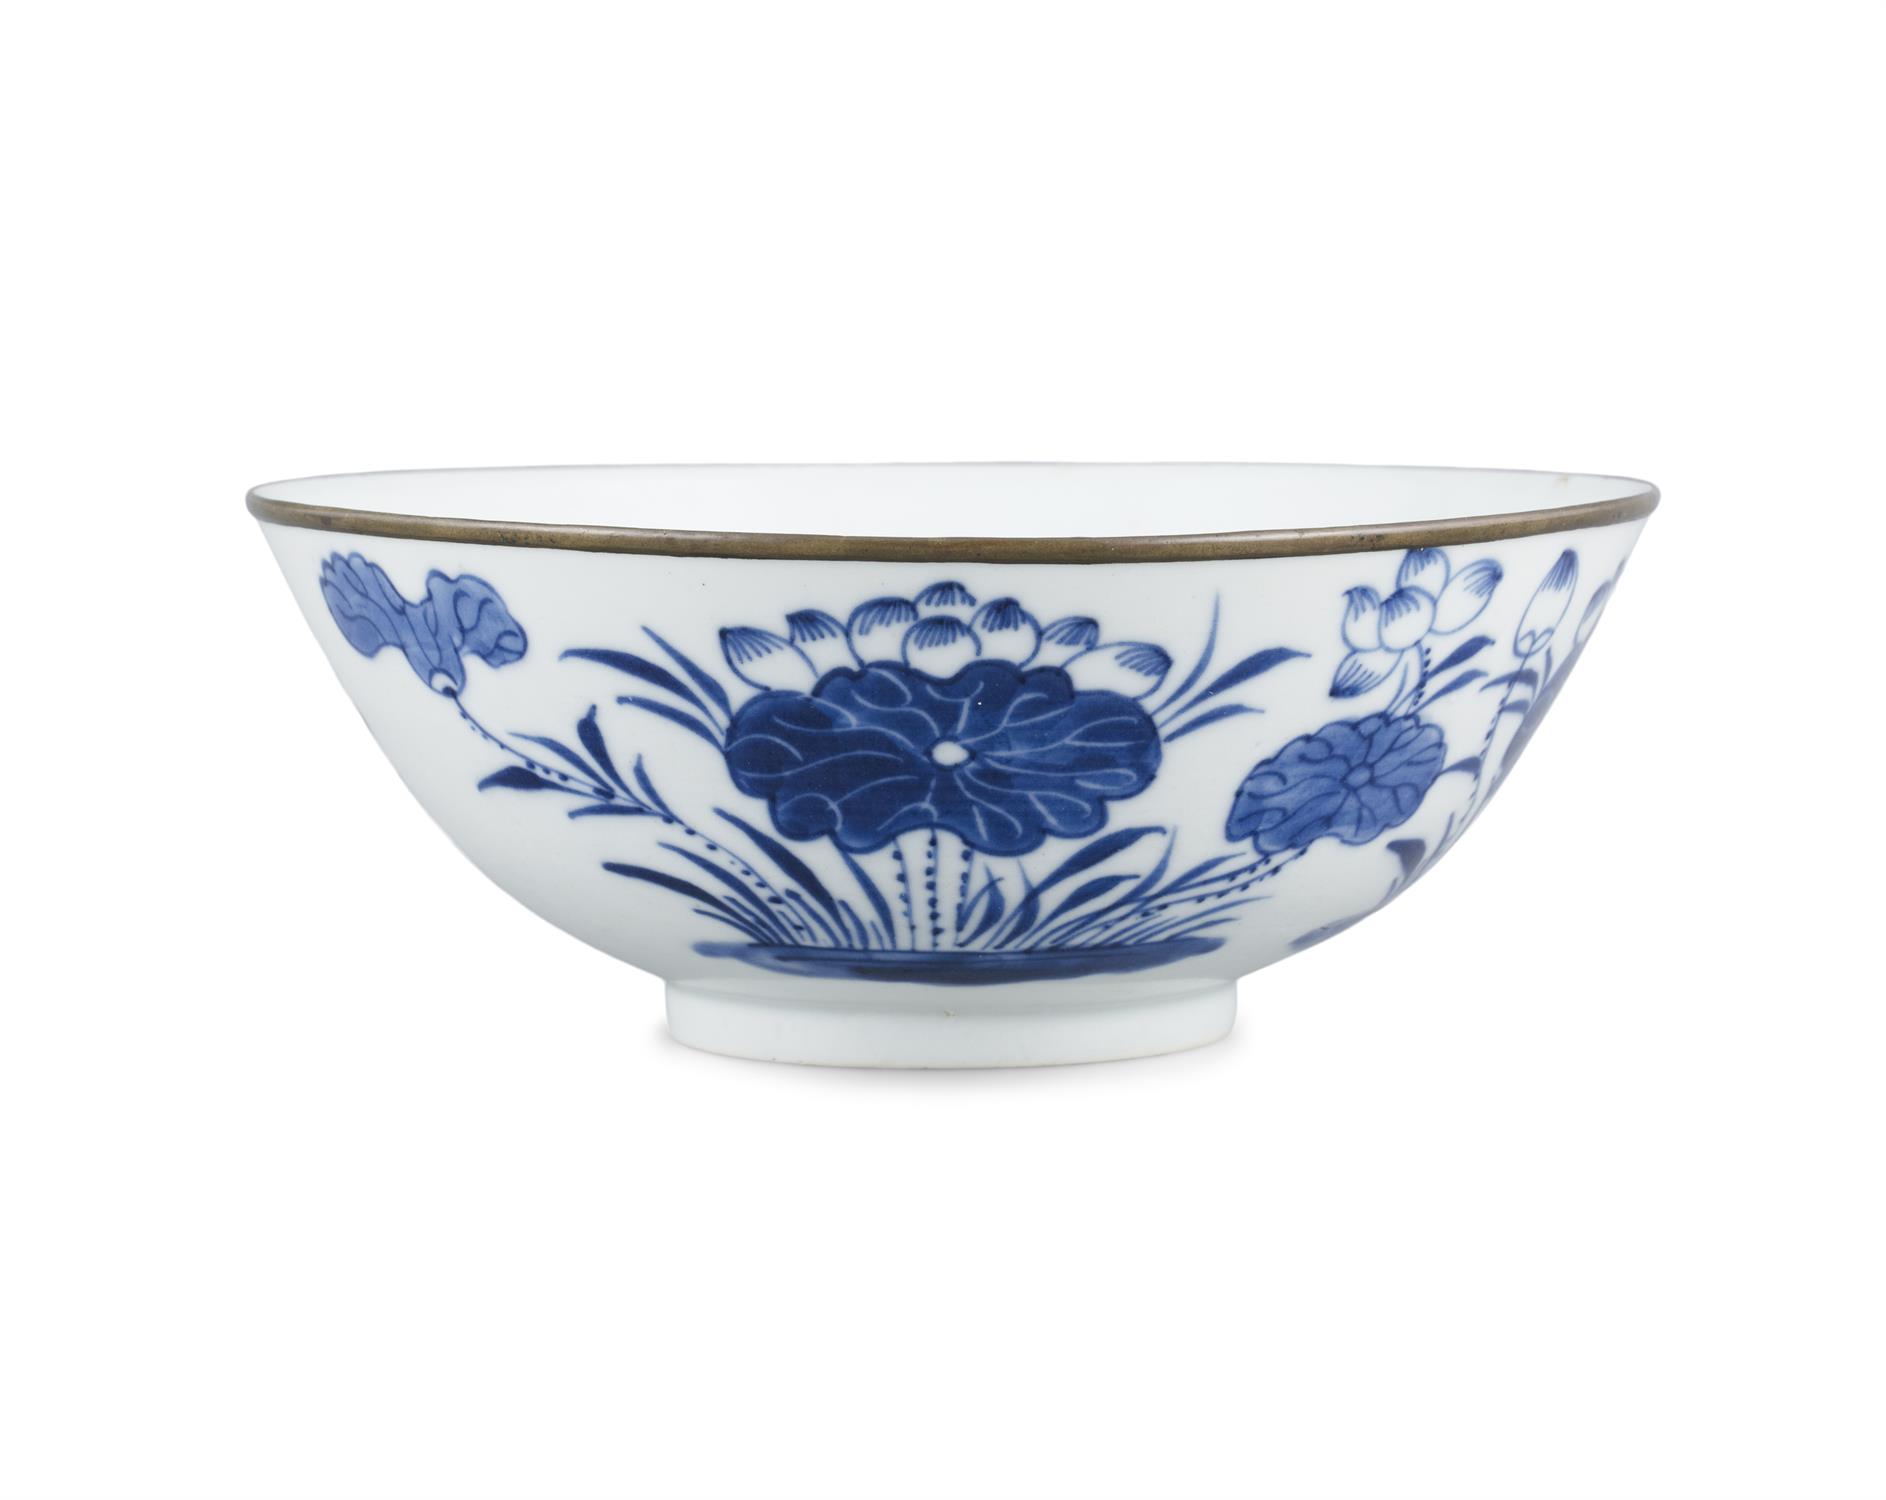 A BLEU DE HUE PORCELAIN BOWL ‘CRAB AND LOTUS POND’ BOWL INSCRIBED WITH THE MARK NGOẠN NGỌC 玩玉 - Image 7 of 18